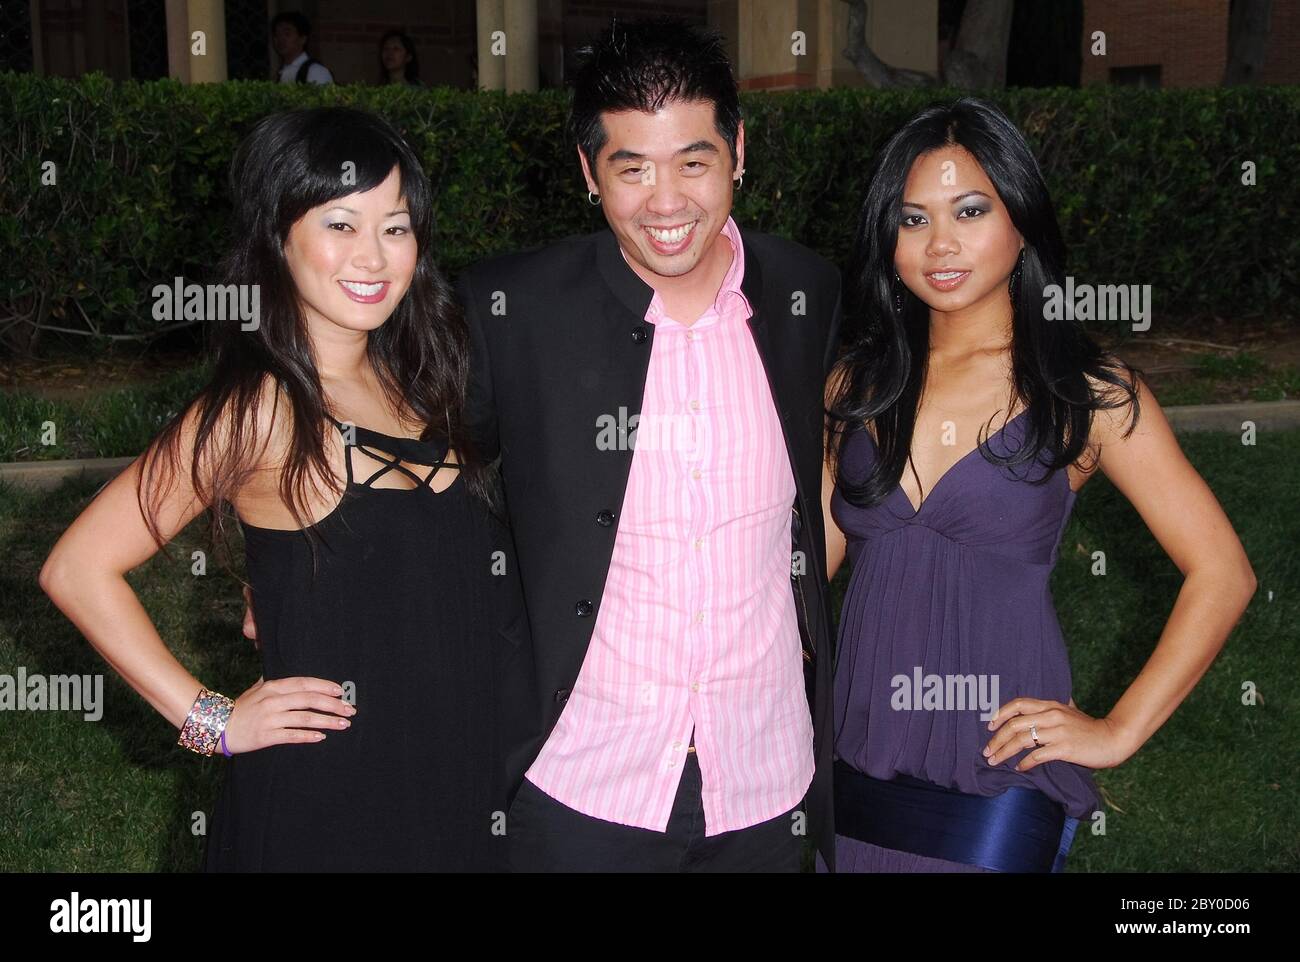 Theresa Michelle Lee, Jeff Lam and Juliette Hing at the 2007 AZN Asian Excellence Awards held at the Royce Hall UCLA Campus in Los Angeles, CA. The event took place on Wednesday, May 16, 2007. Photo by: SBM / PictureLux - File Reference # 34006-5083SBMPLX Stock Photo